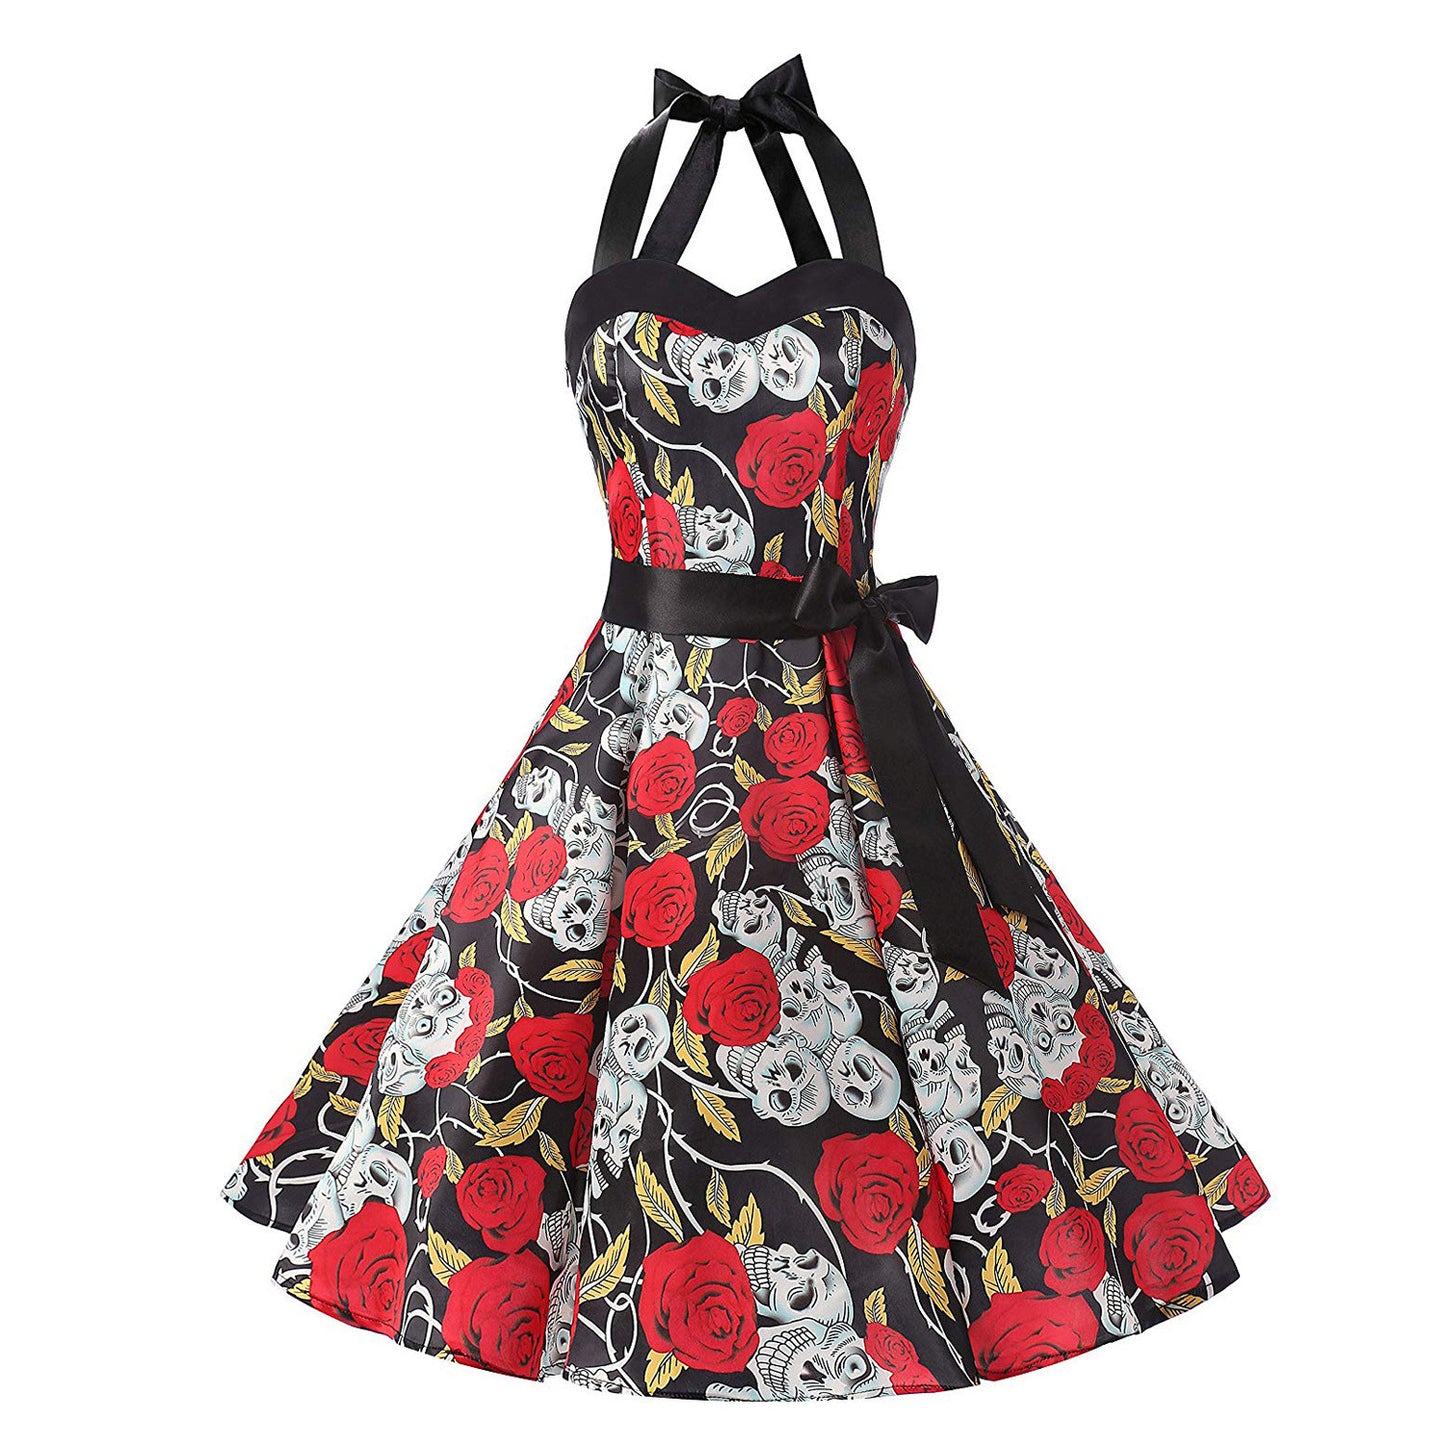 A Gothic-style "The Hepburn Haunt - Halloween Easter Hepburn Dress" adorned with roses.